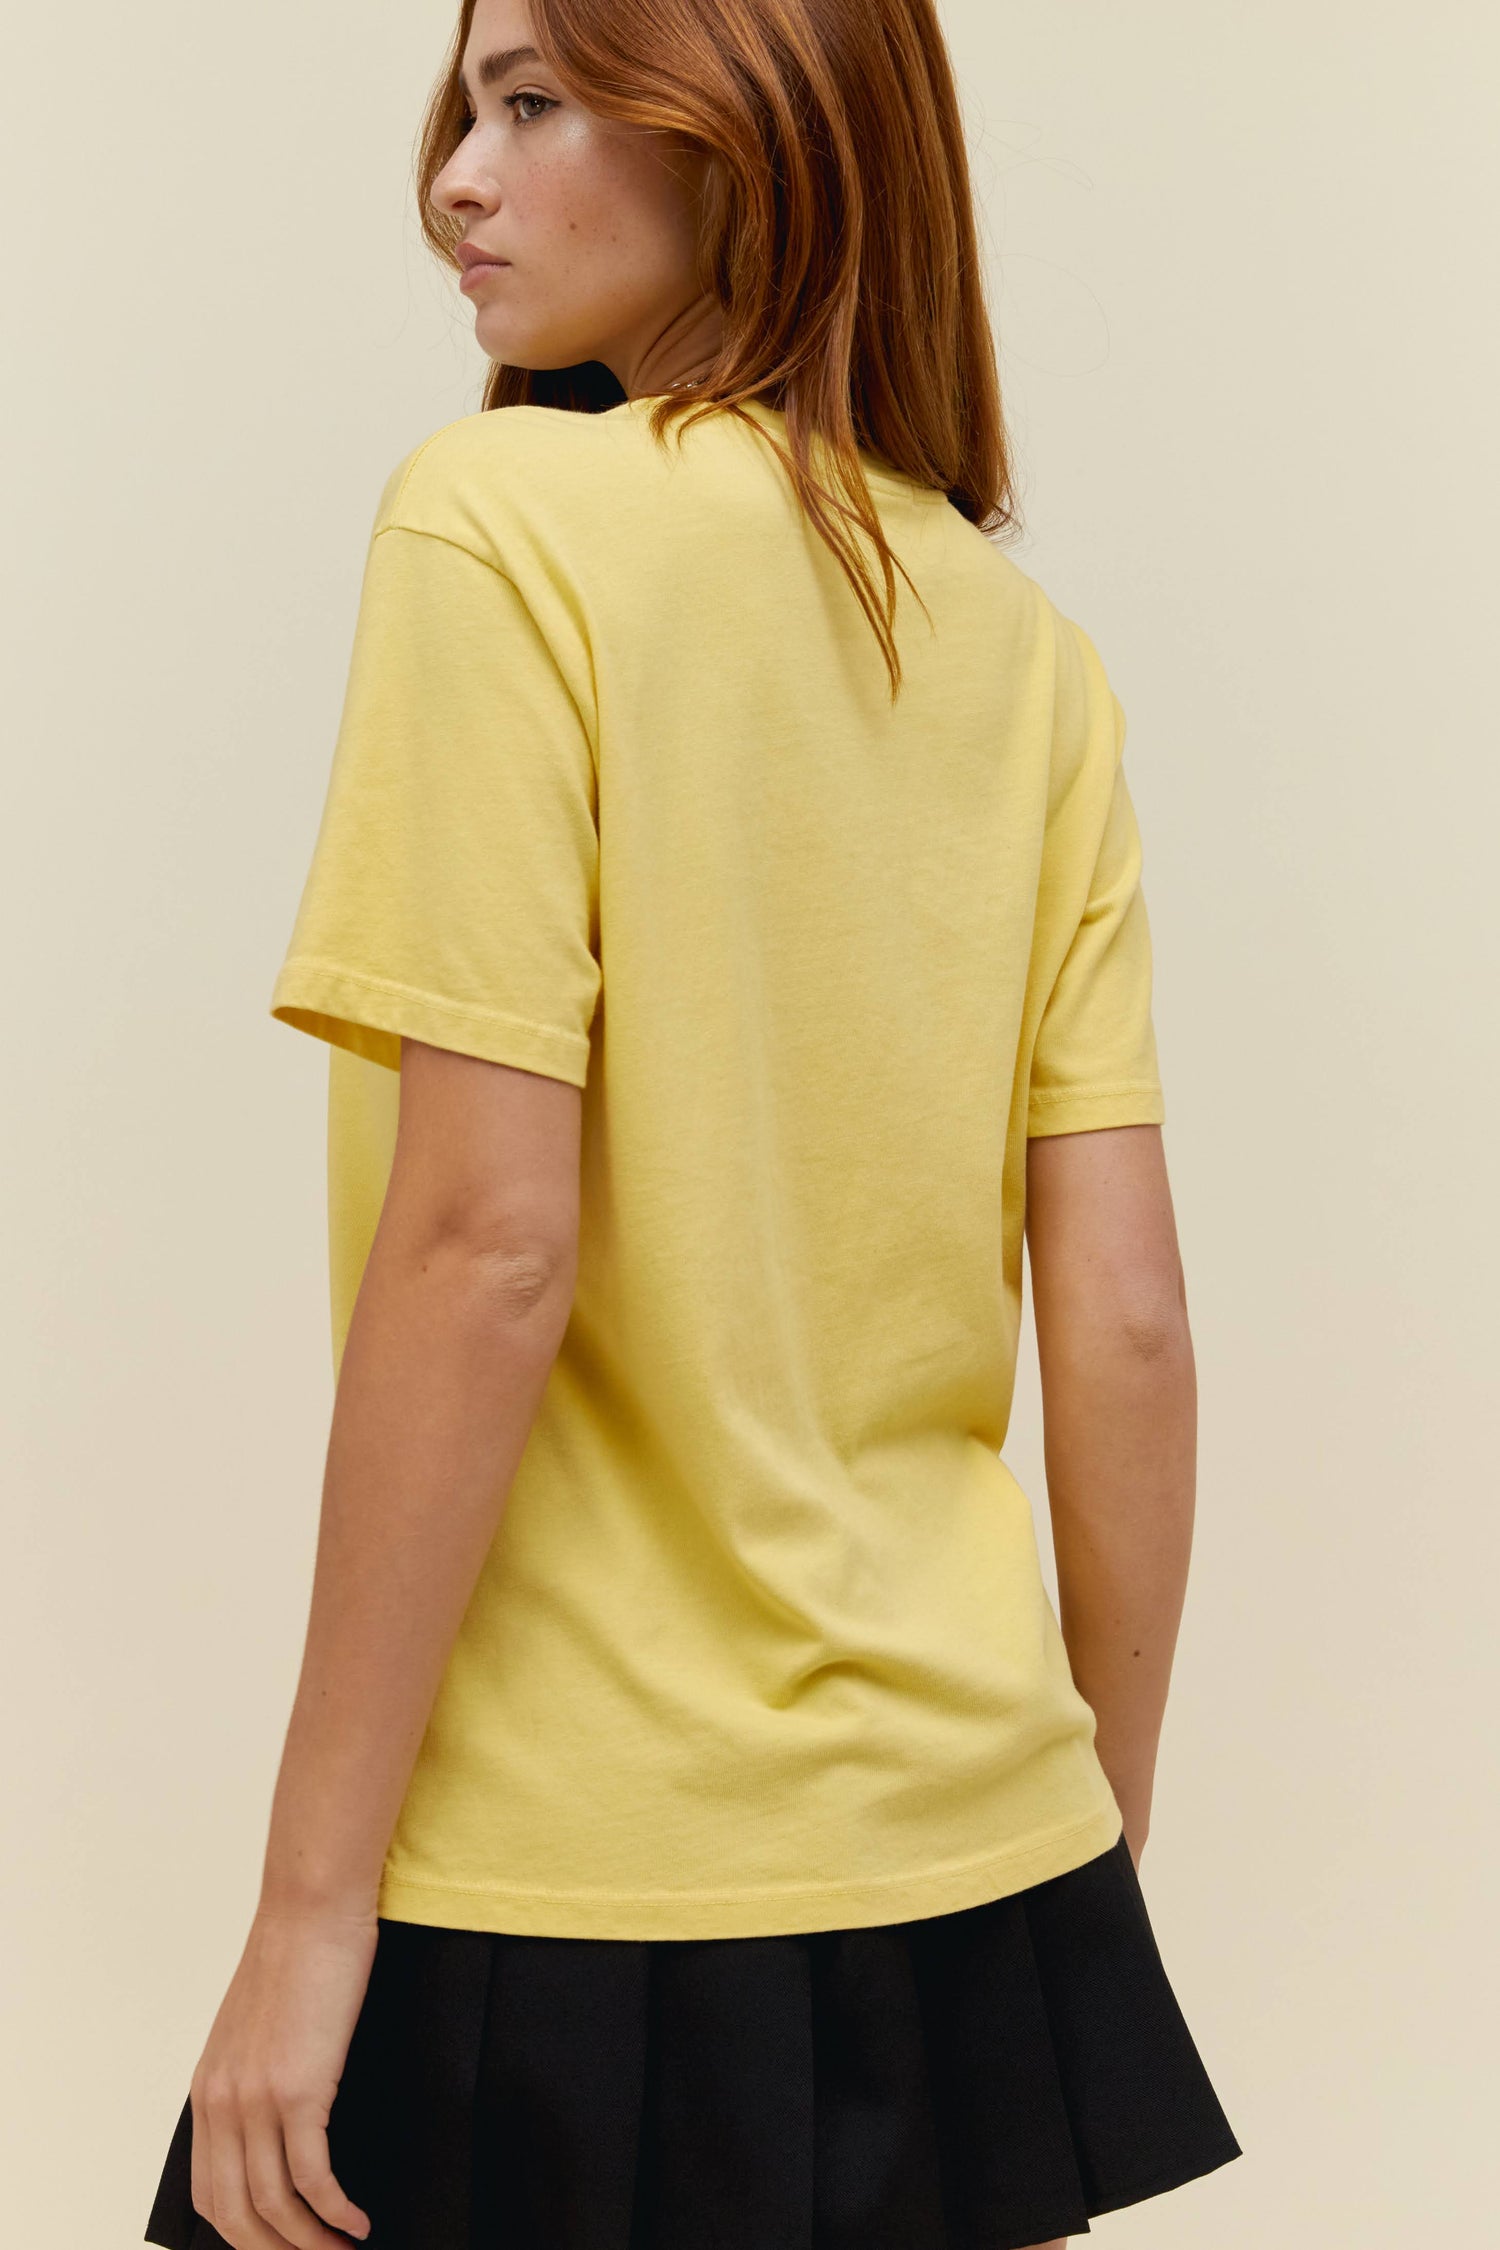 A model featuring a yellow weekend tee designed with flowers in the muddke and stamped with 'Guns N' Roses'